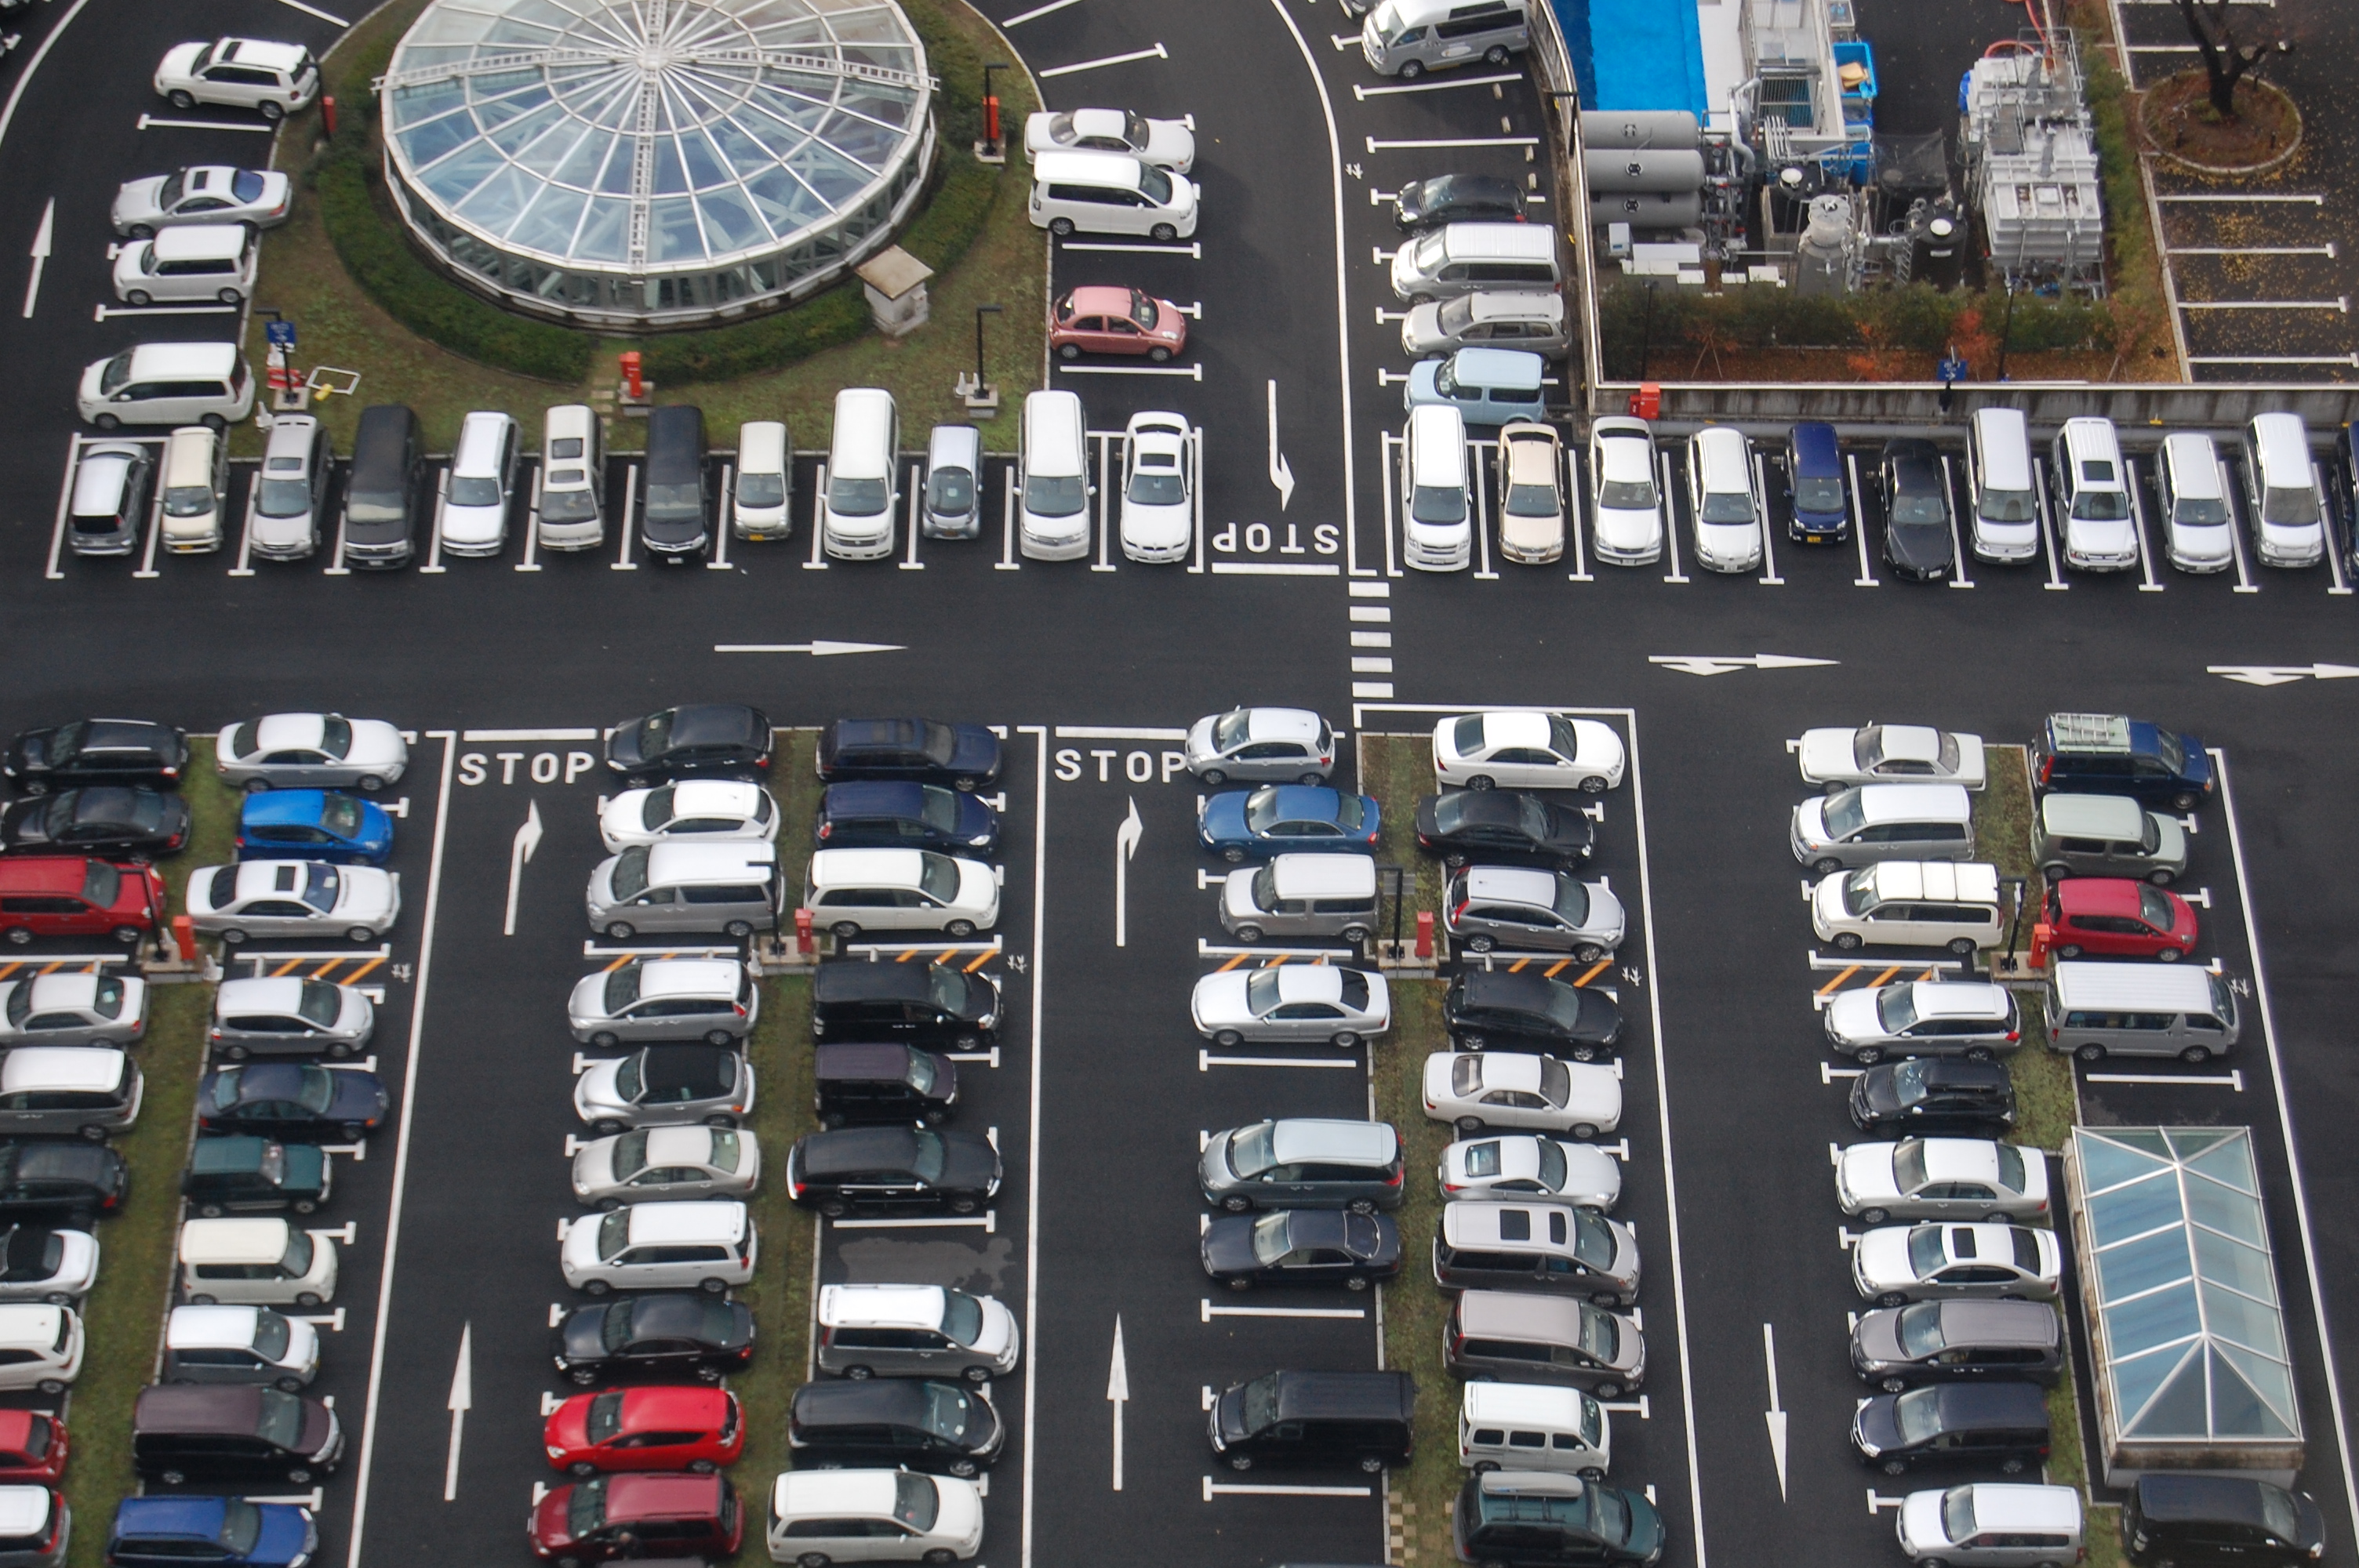 Parking lots like this one in Tokyo currently take up vast tracts of otherwise useless urban space, argues Lyft.